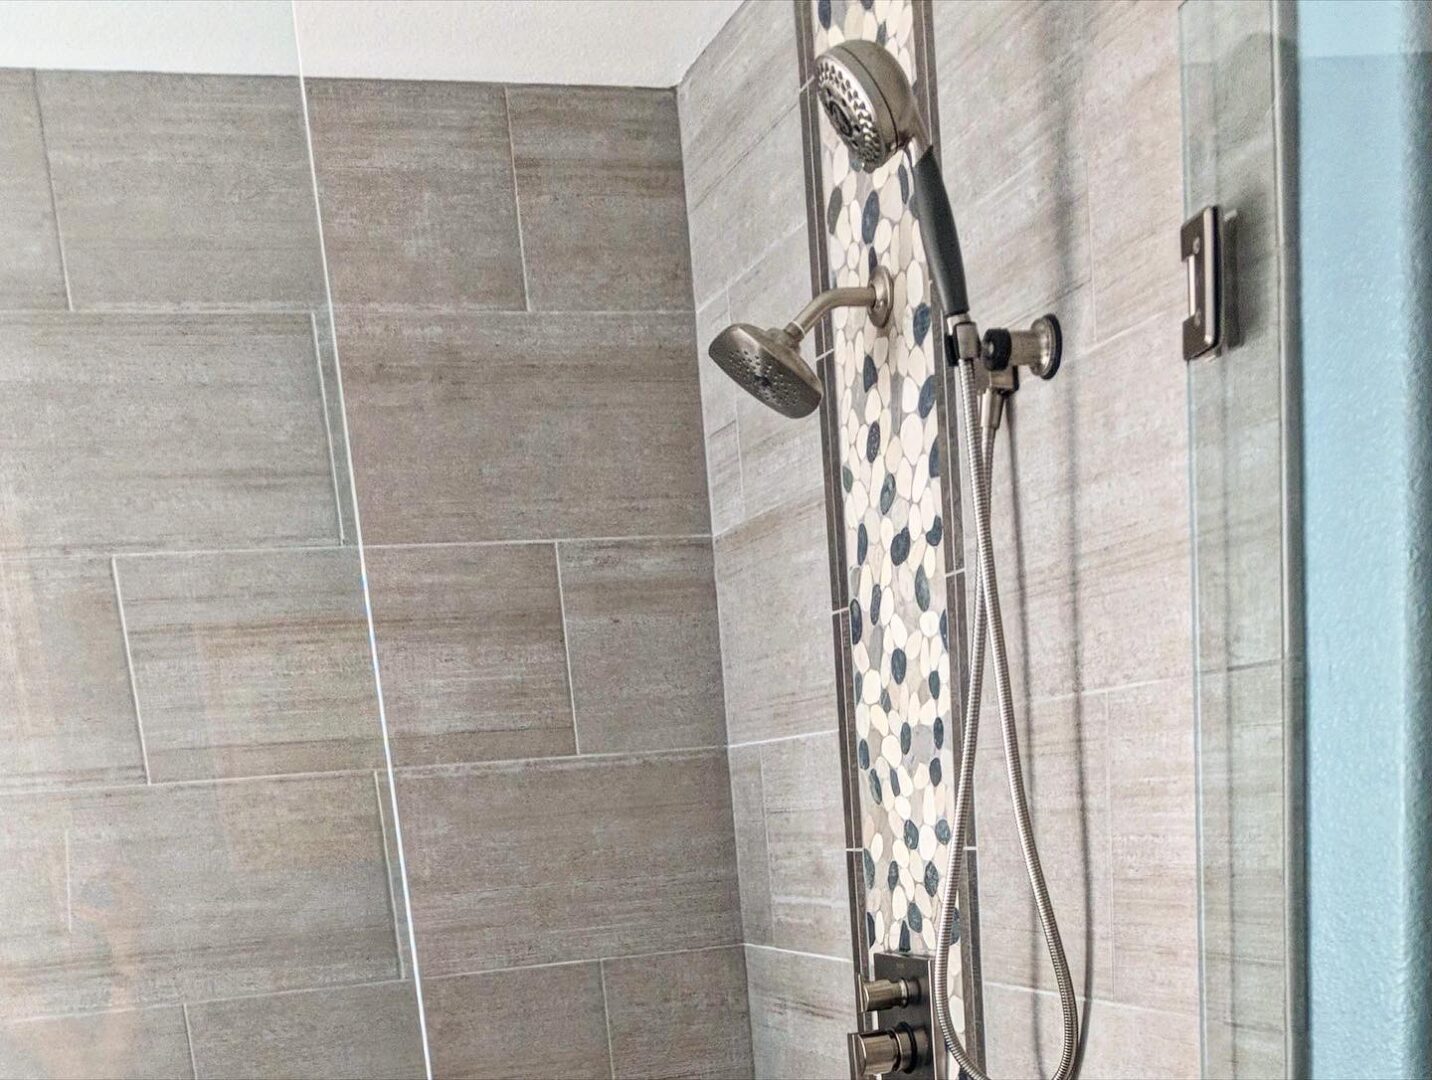 A giraffe shower head in the middle of a bathroom.